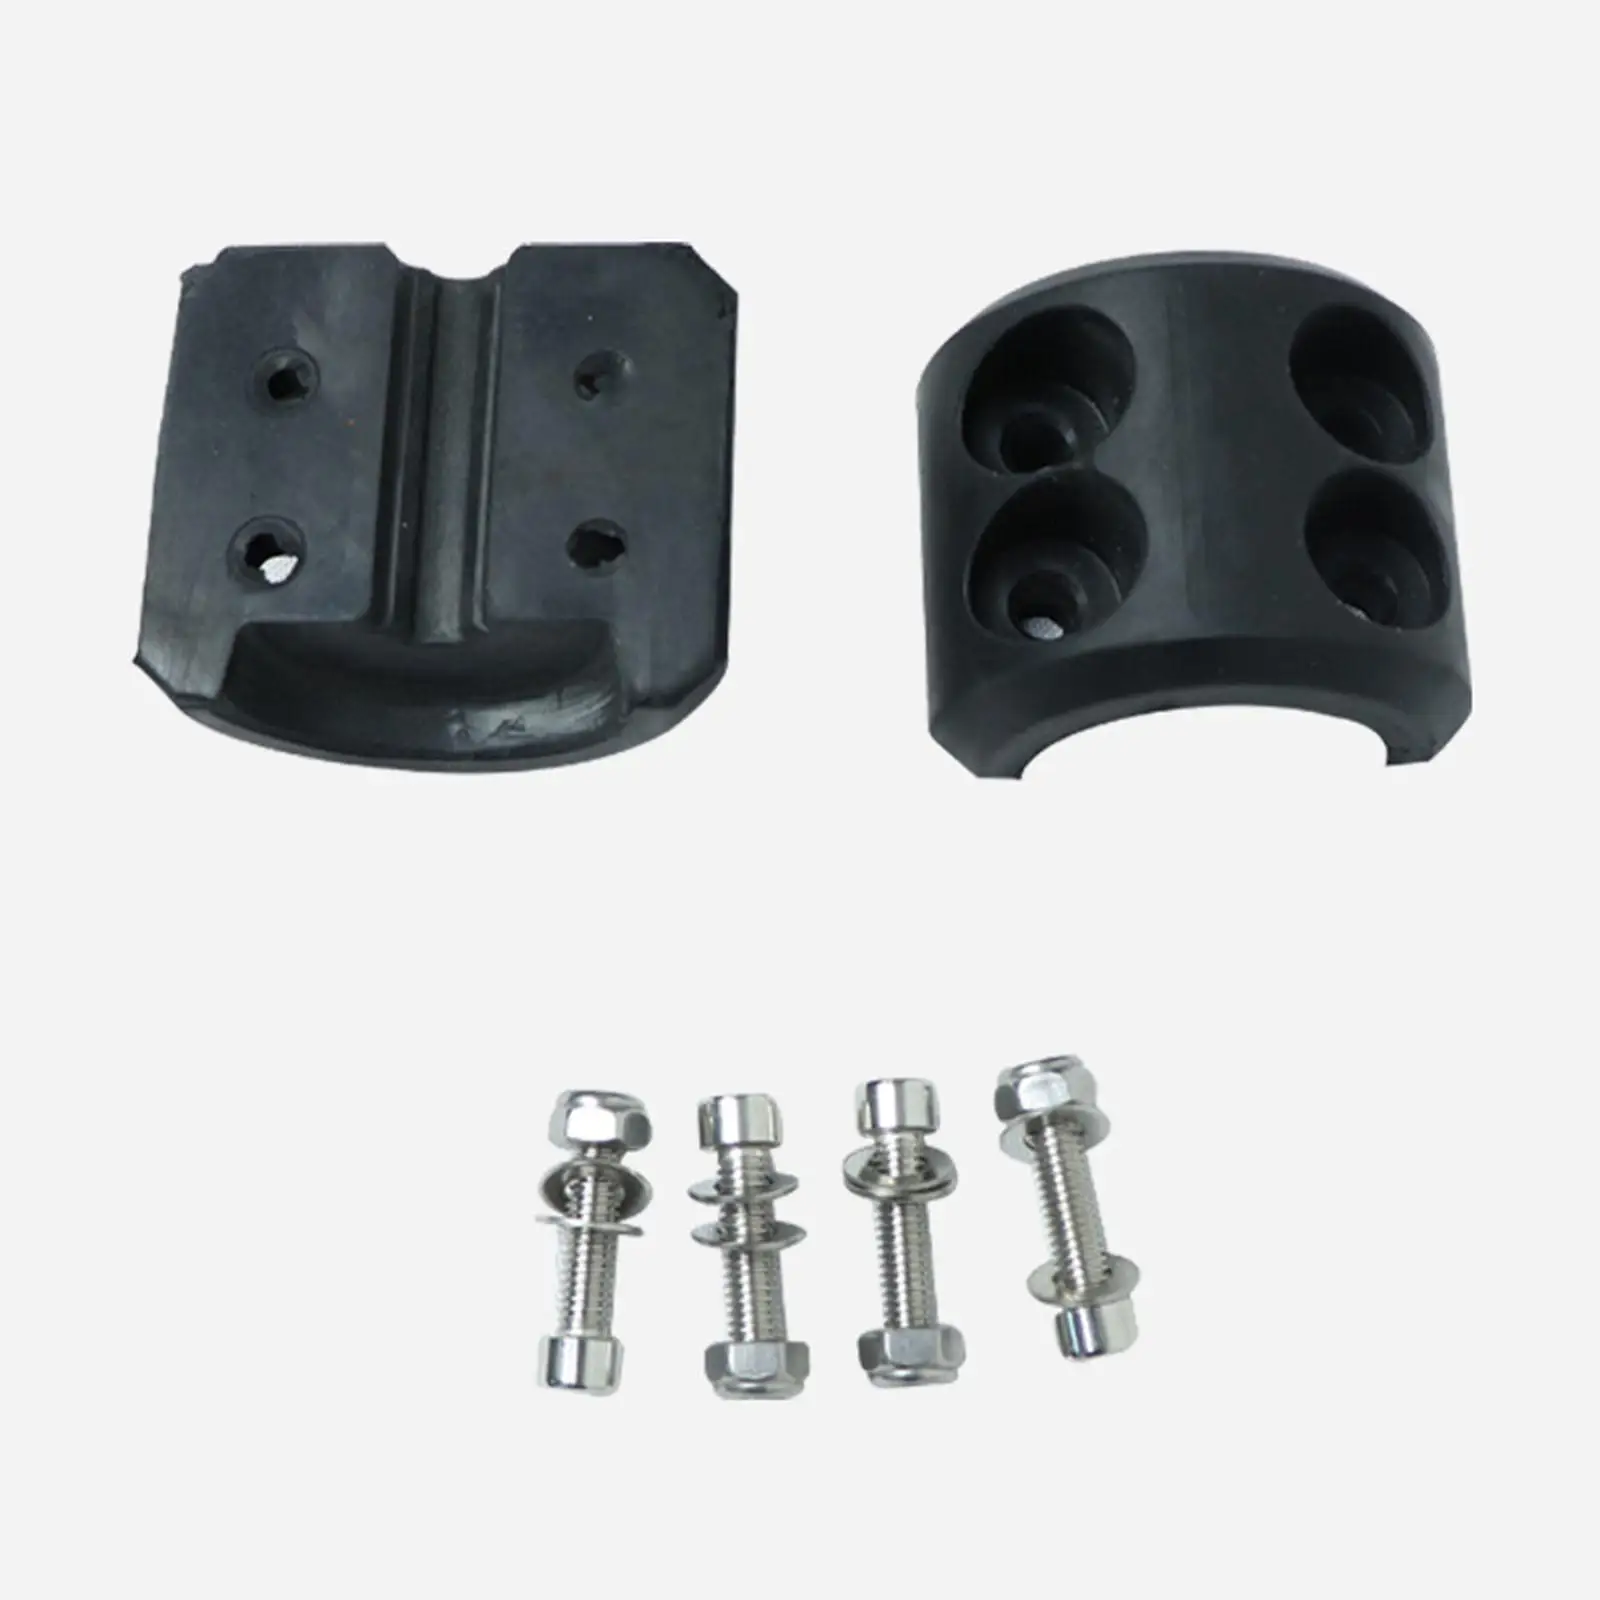 Replacement Swing Pulley Accessories Swing Roller Skating Accessories with Screws Rubber Buffer for Hanging Chair Outdoor Swing